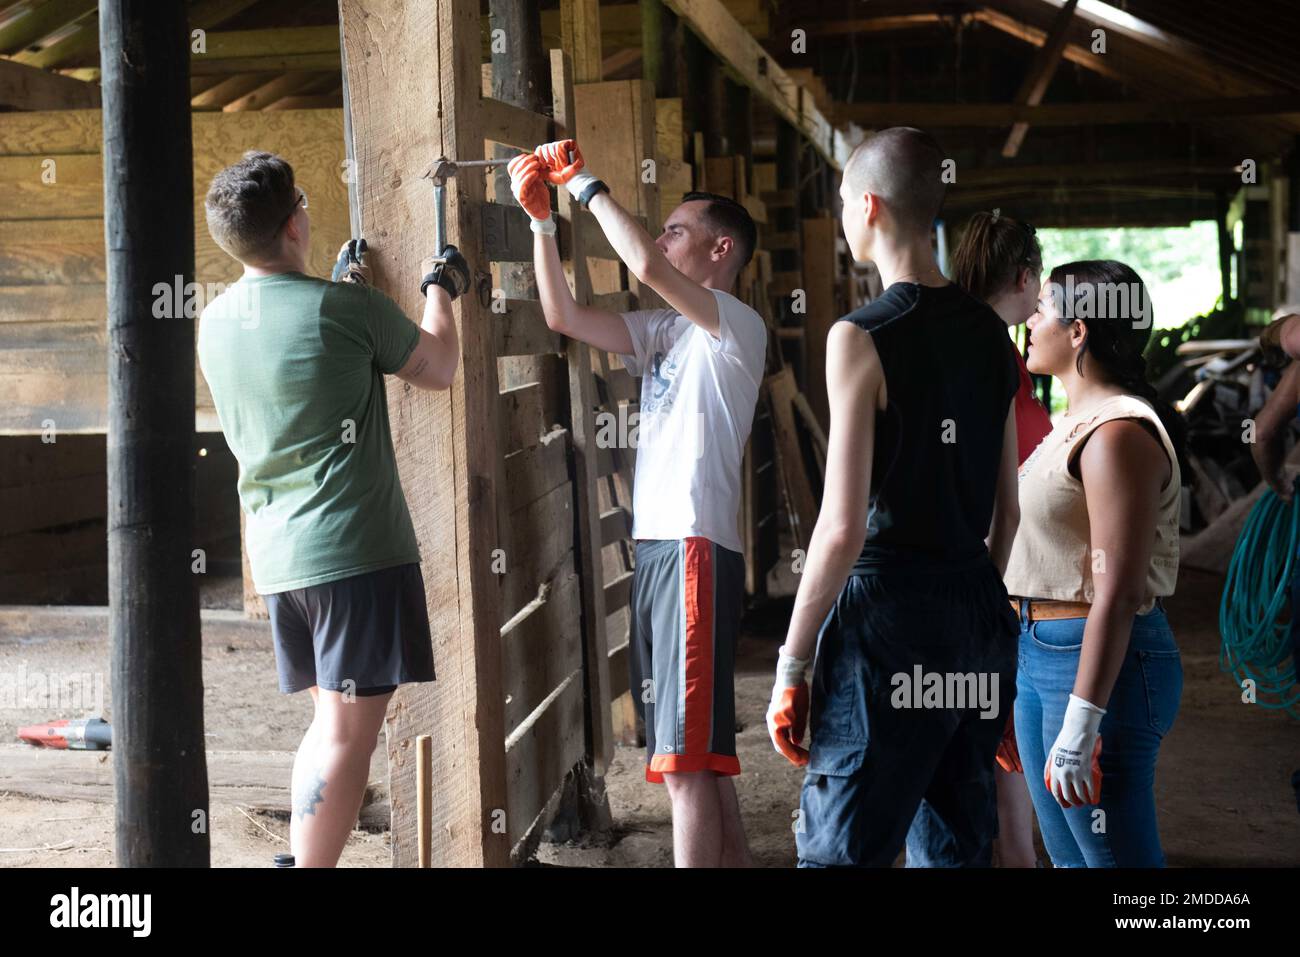 U.S. Navy Sailors, assigned to the aircraft carrier USS John C. Stennis (CVN 74), remove planks of wood at Willow Woods Equine Sanctuary as part of a community relations event, in Hampton, Virginia, July 16, 2022. The John C. Stennis is in Newport News Shipyard working alongside NNS, NAVSEA and contractors conducting Refueling and Complex Overhaul as part of the mission to deliver the warship back in the fight, on time and on budget, to resume its duty of defending the United States. Stock Photo